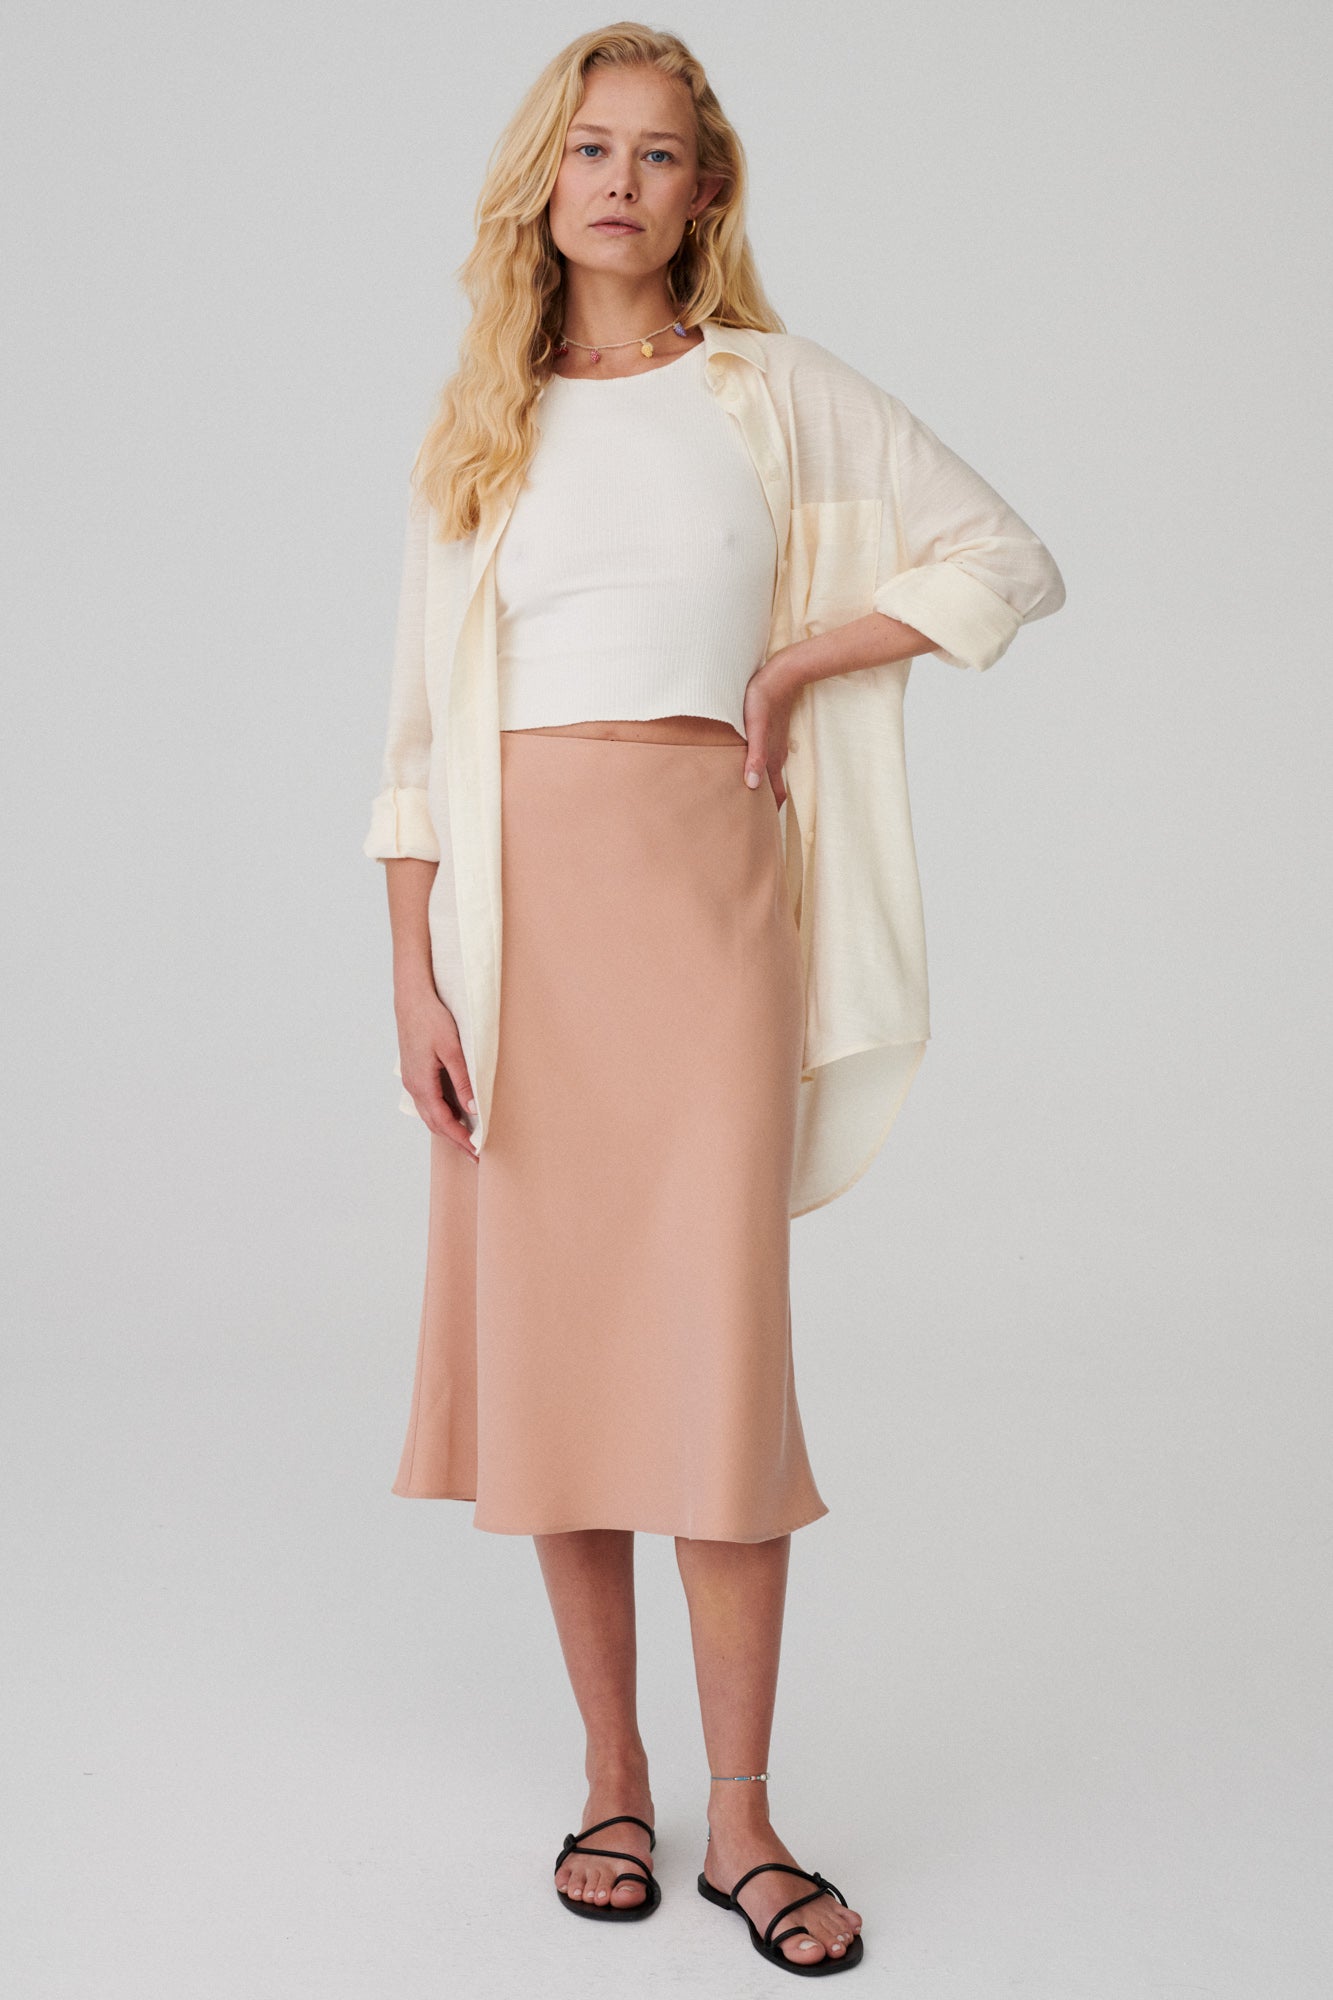 Tencel skirt / 07 / 05 / peach flower *top-in-organic-cotton-10-02-cream-white* ?The model is 173 cm high and wears size S?